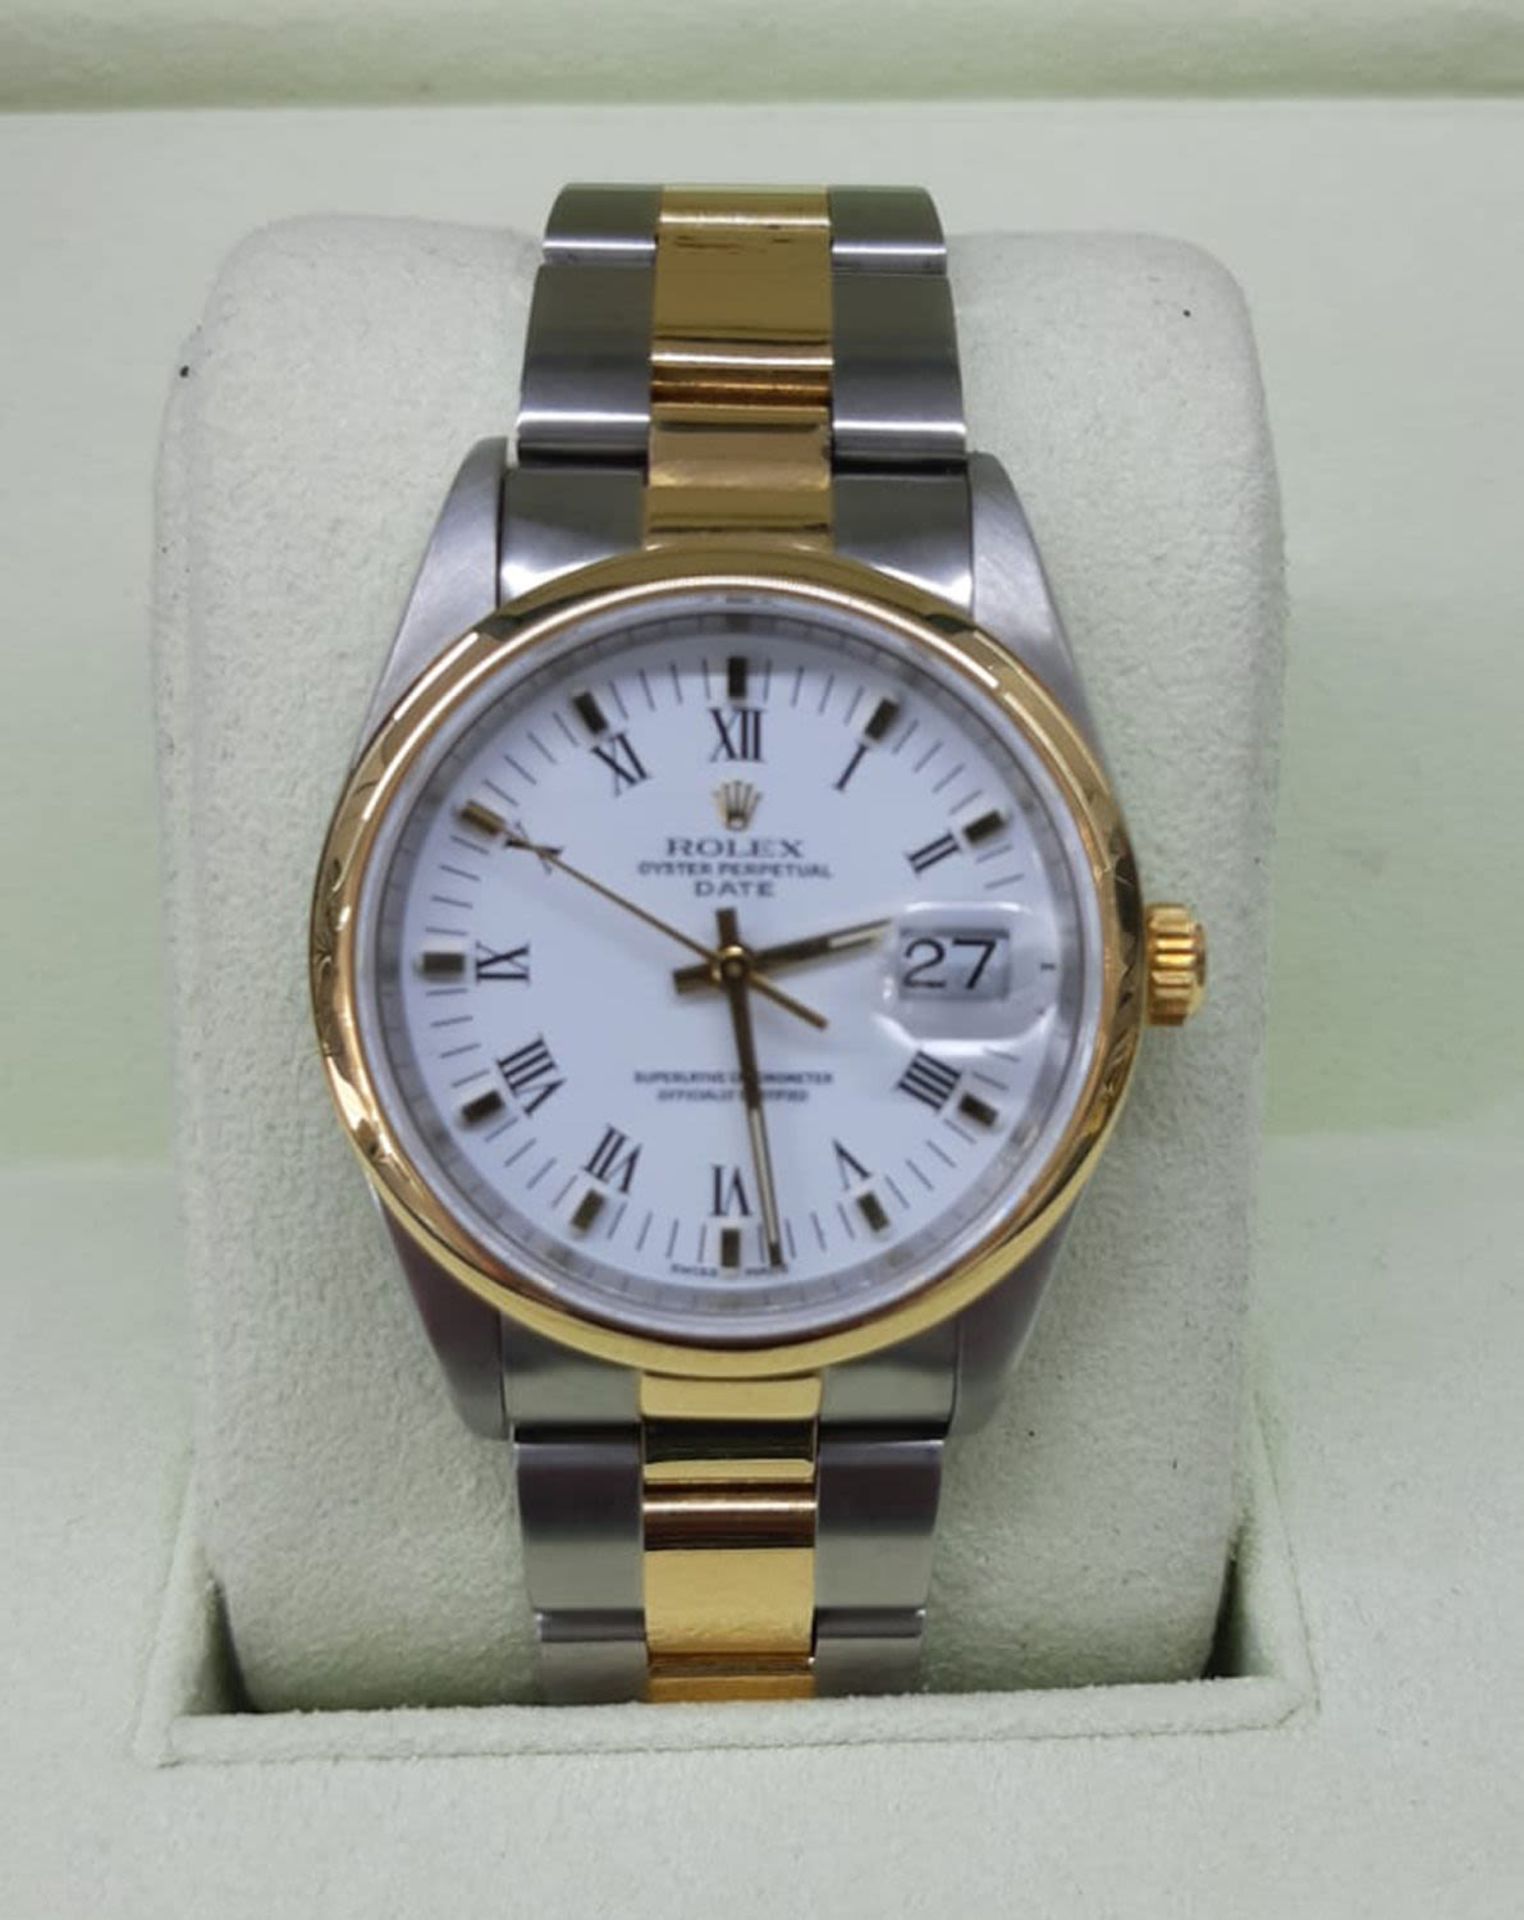 Rolex Oyster Perpetual Date, unisex cadet size, in steel and 18k gold